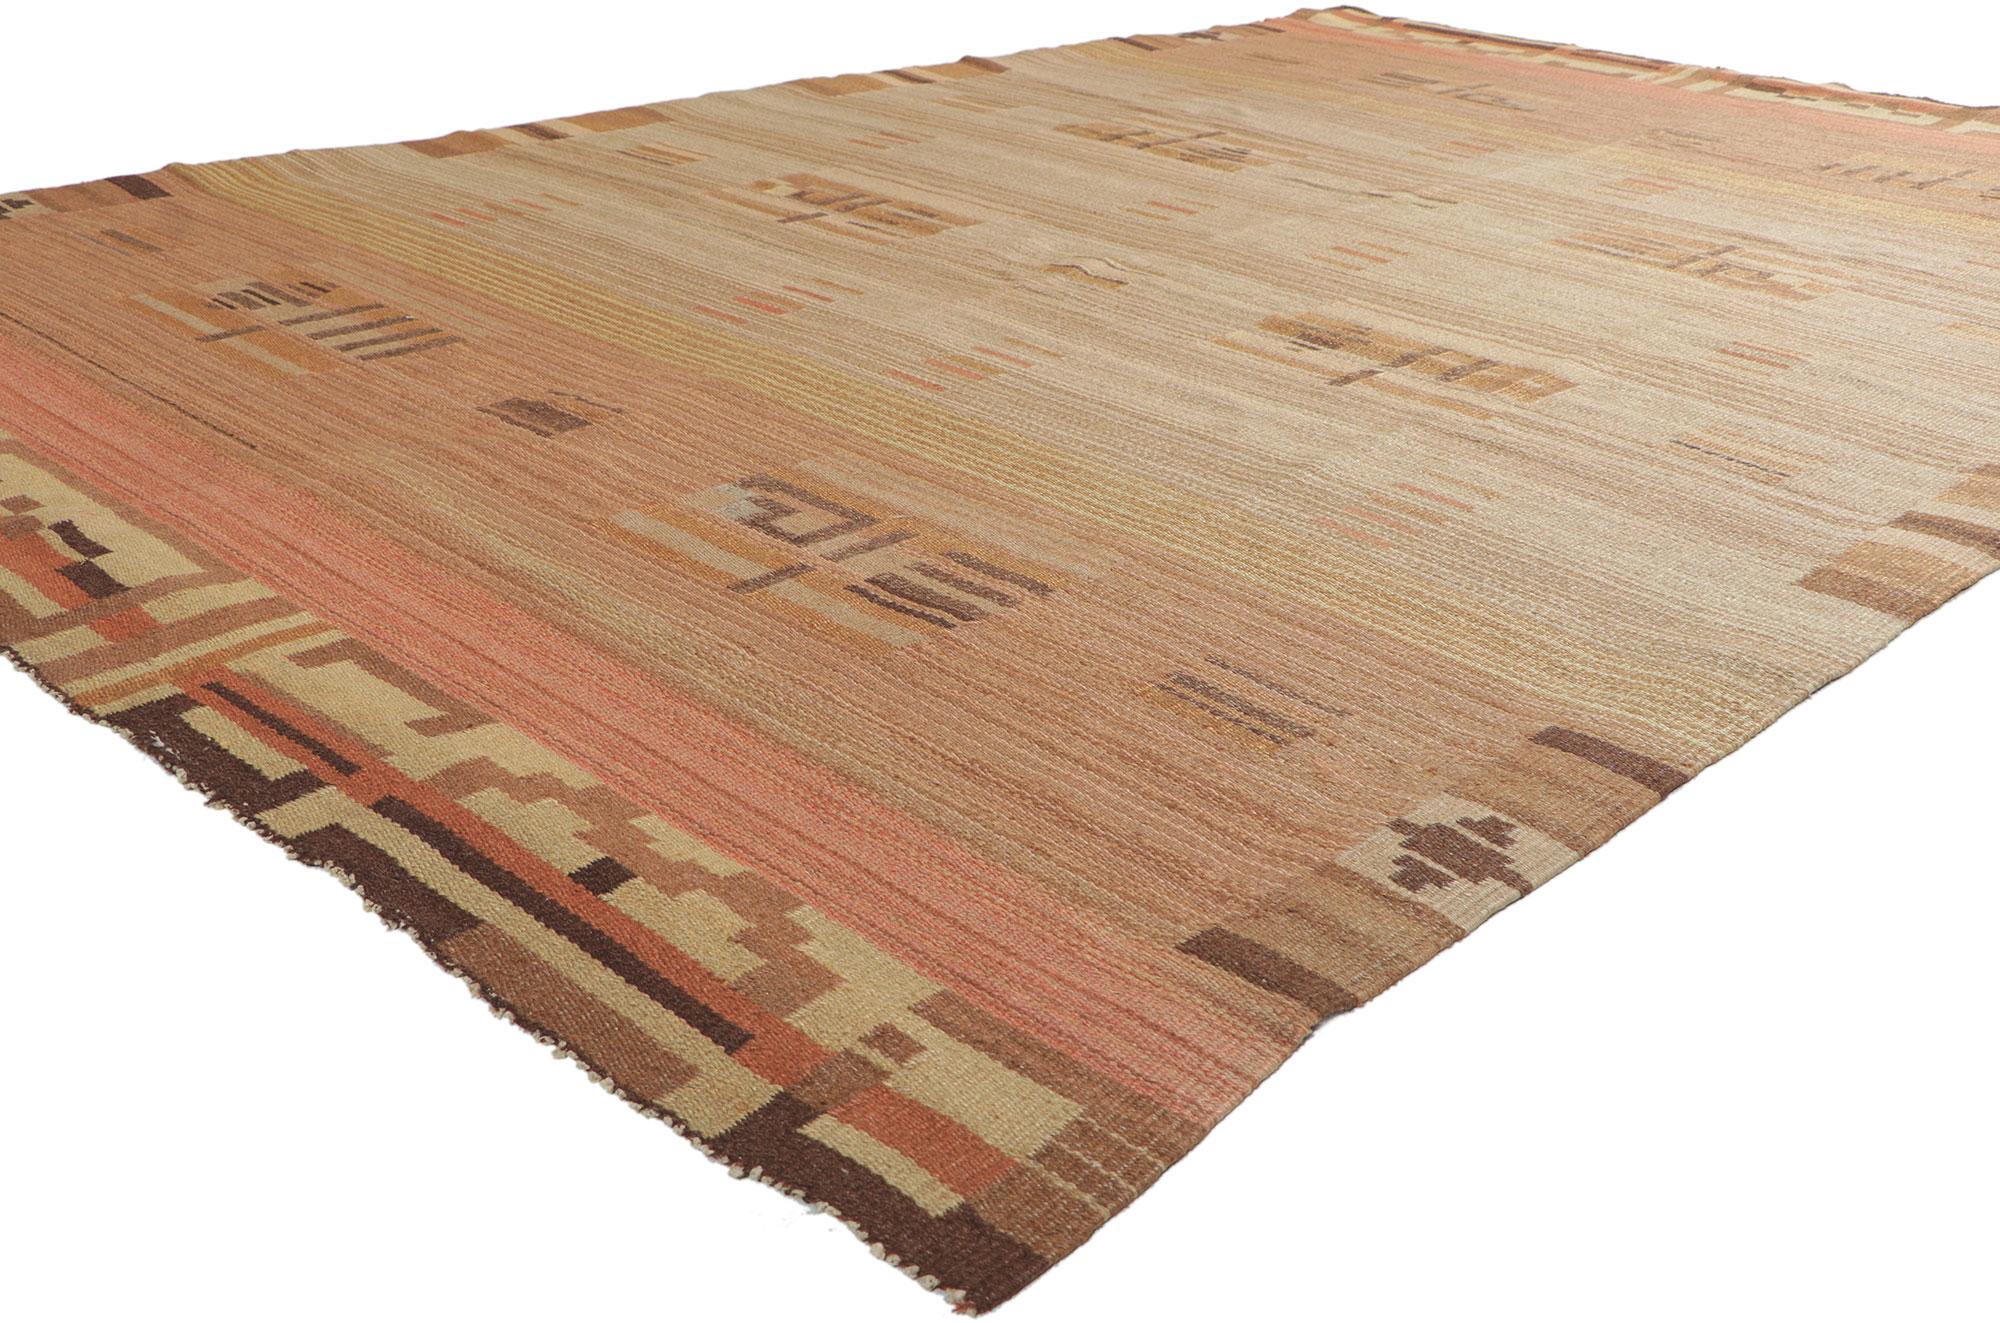 78464 Impi Sotavalta Finnish Flatweave Rug, 06'04 x 09'09. Bauhaus simplicity meets stylized Art Deco in this handwoven Finnish flatweave rug. The eye-catching Biophilic Design and earthy colorway woven into this piece work together creating a truly